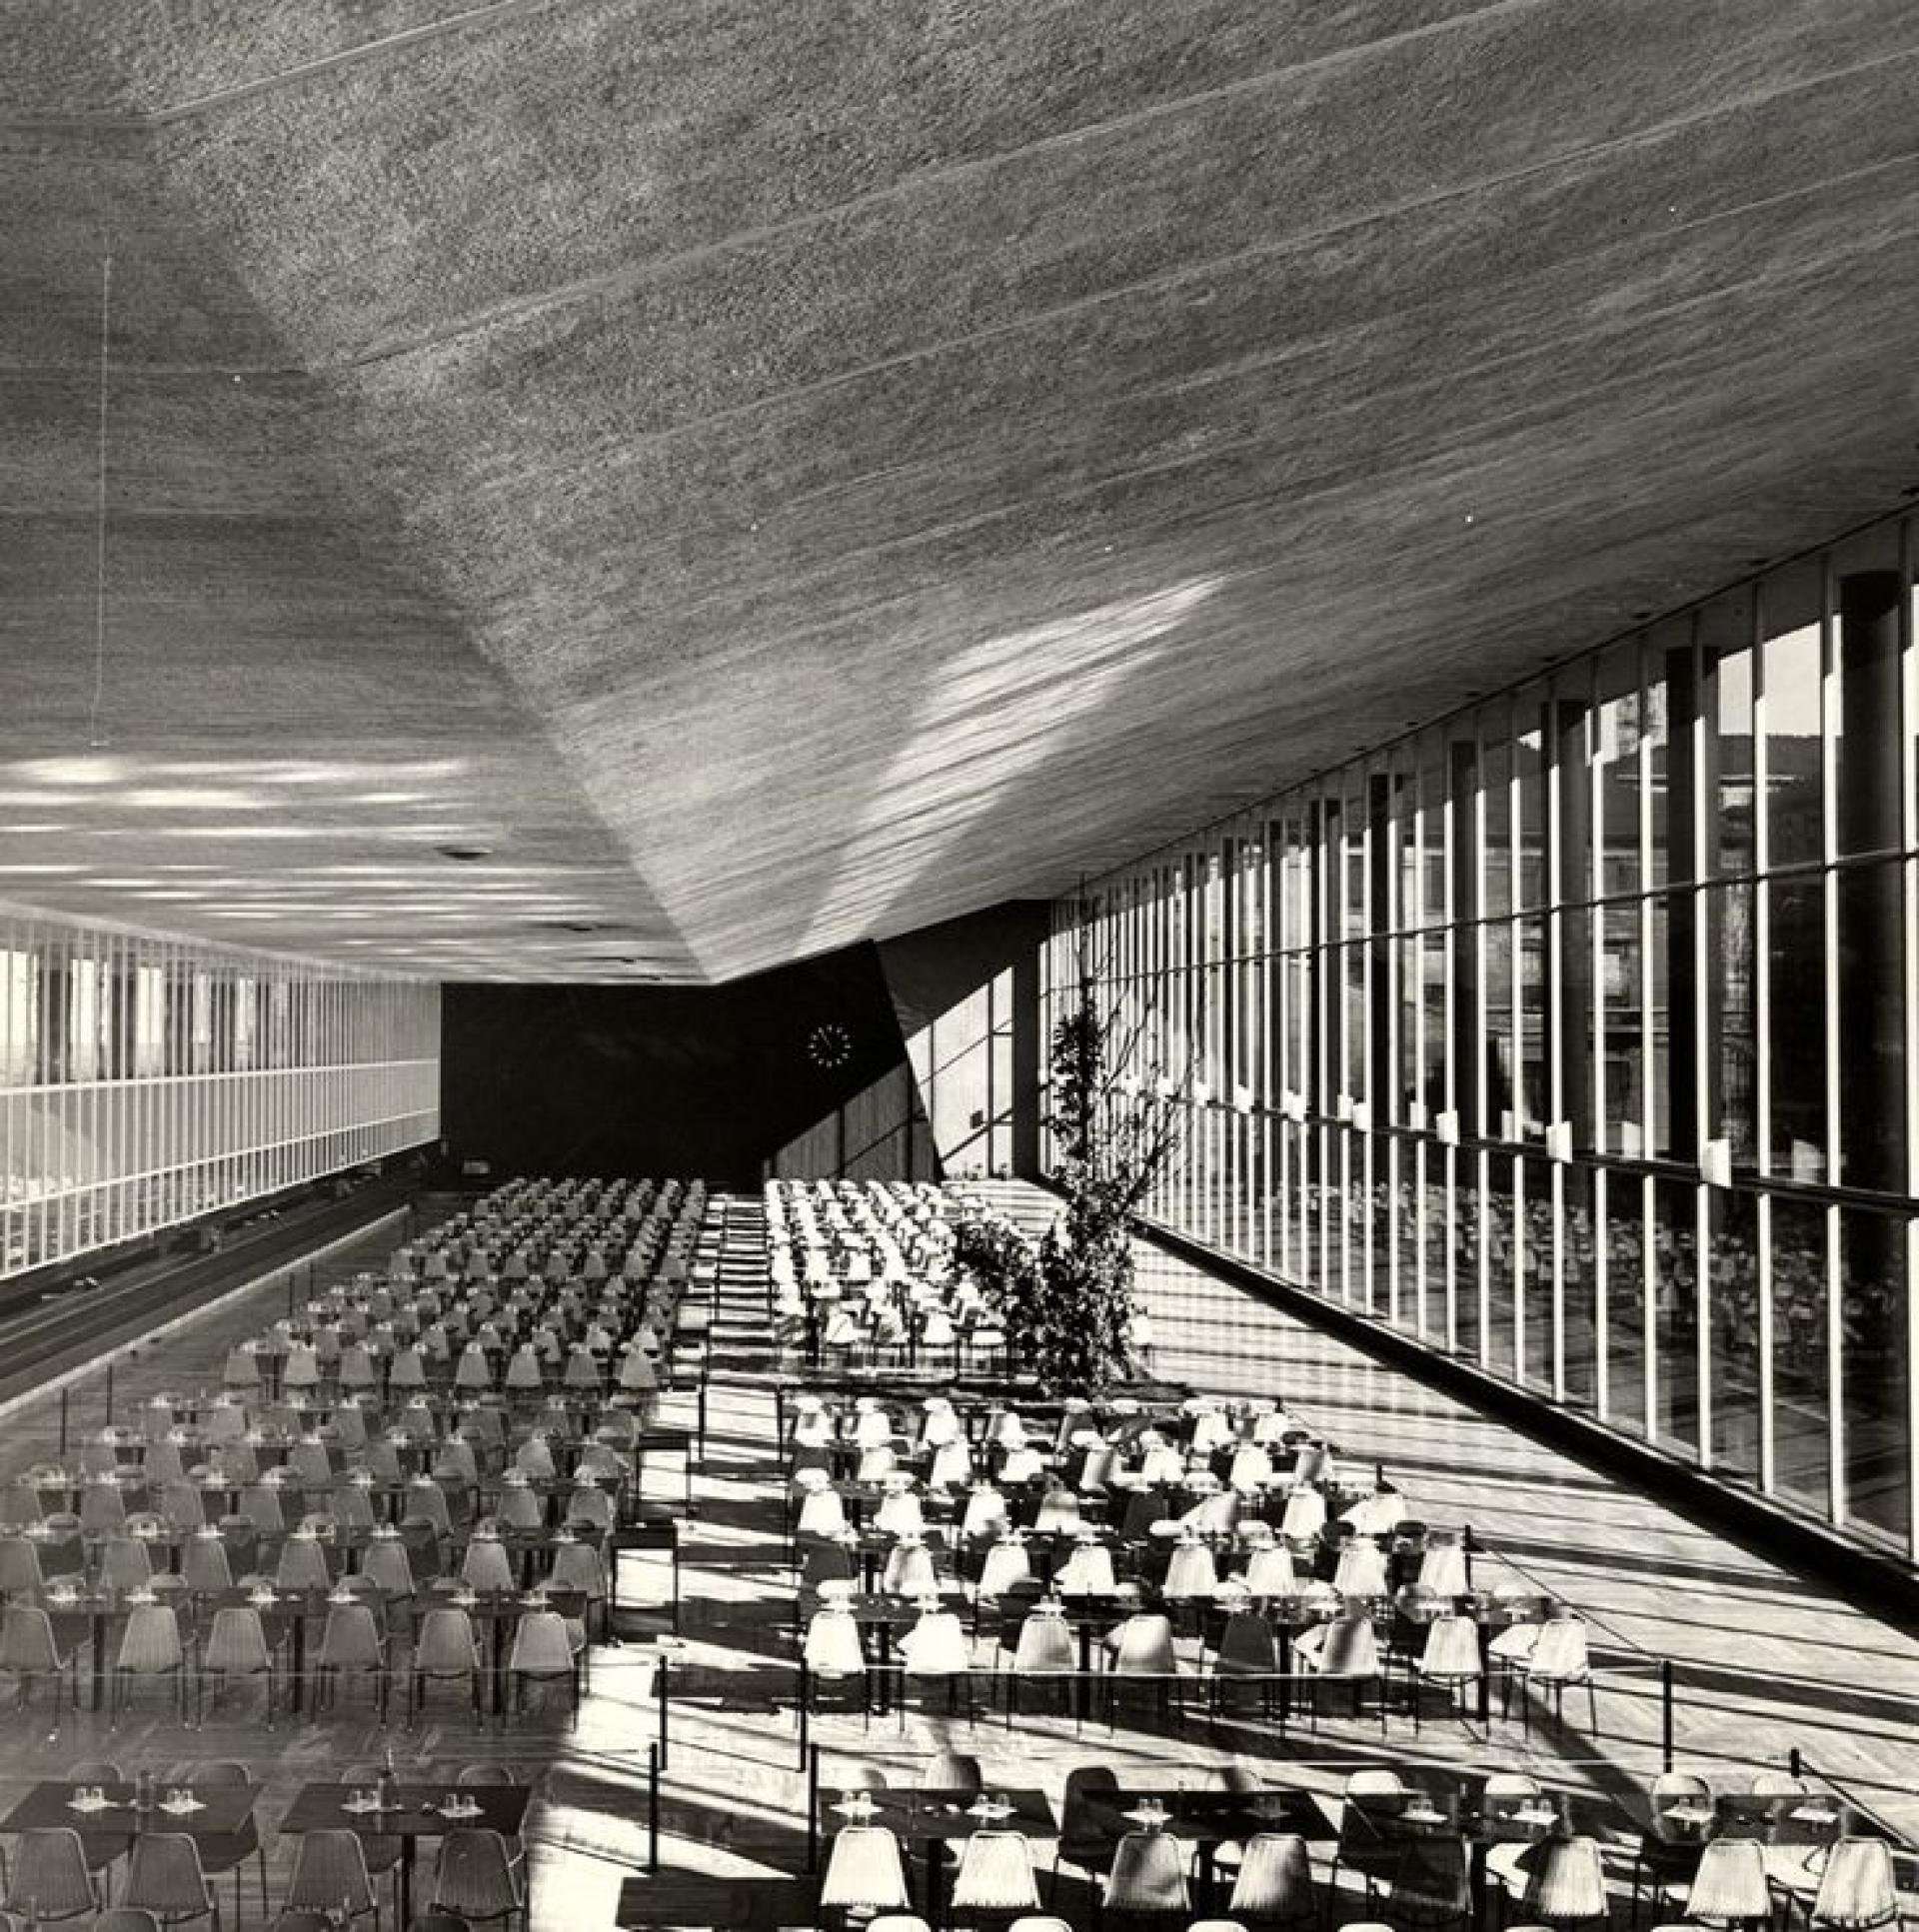 Workers Canteen for 1600 employees of Pirelli. | Photo © Archive Pirelli